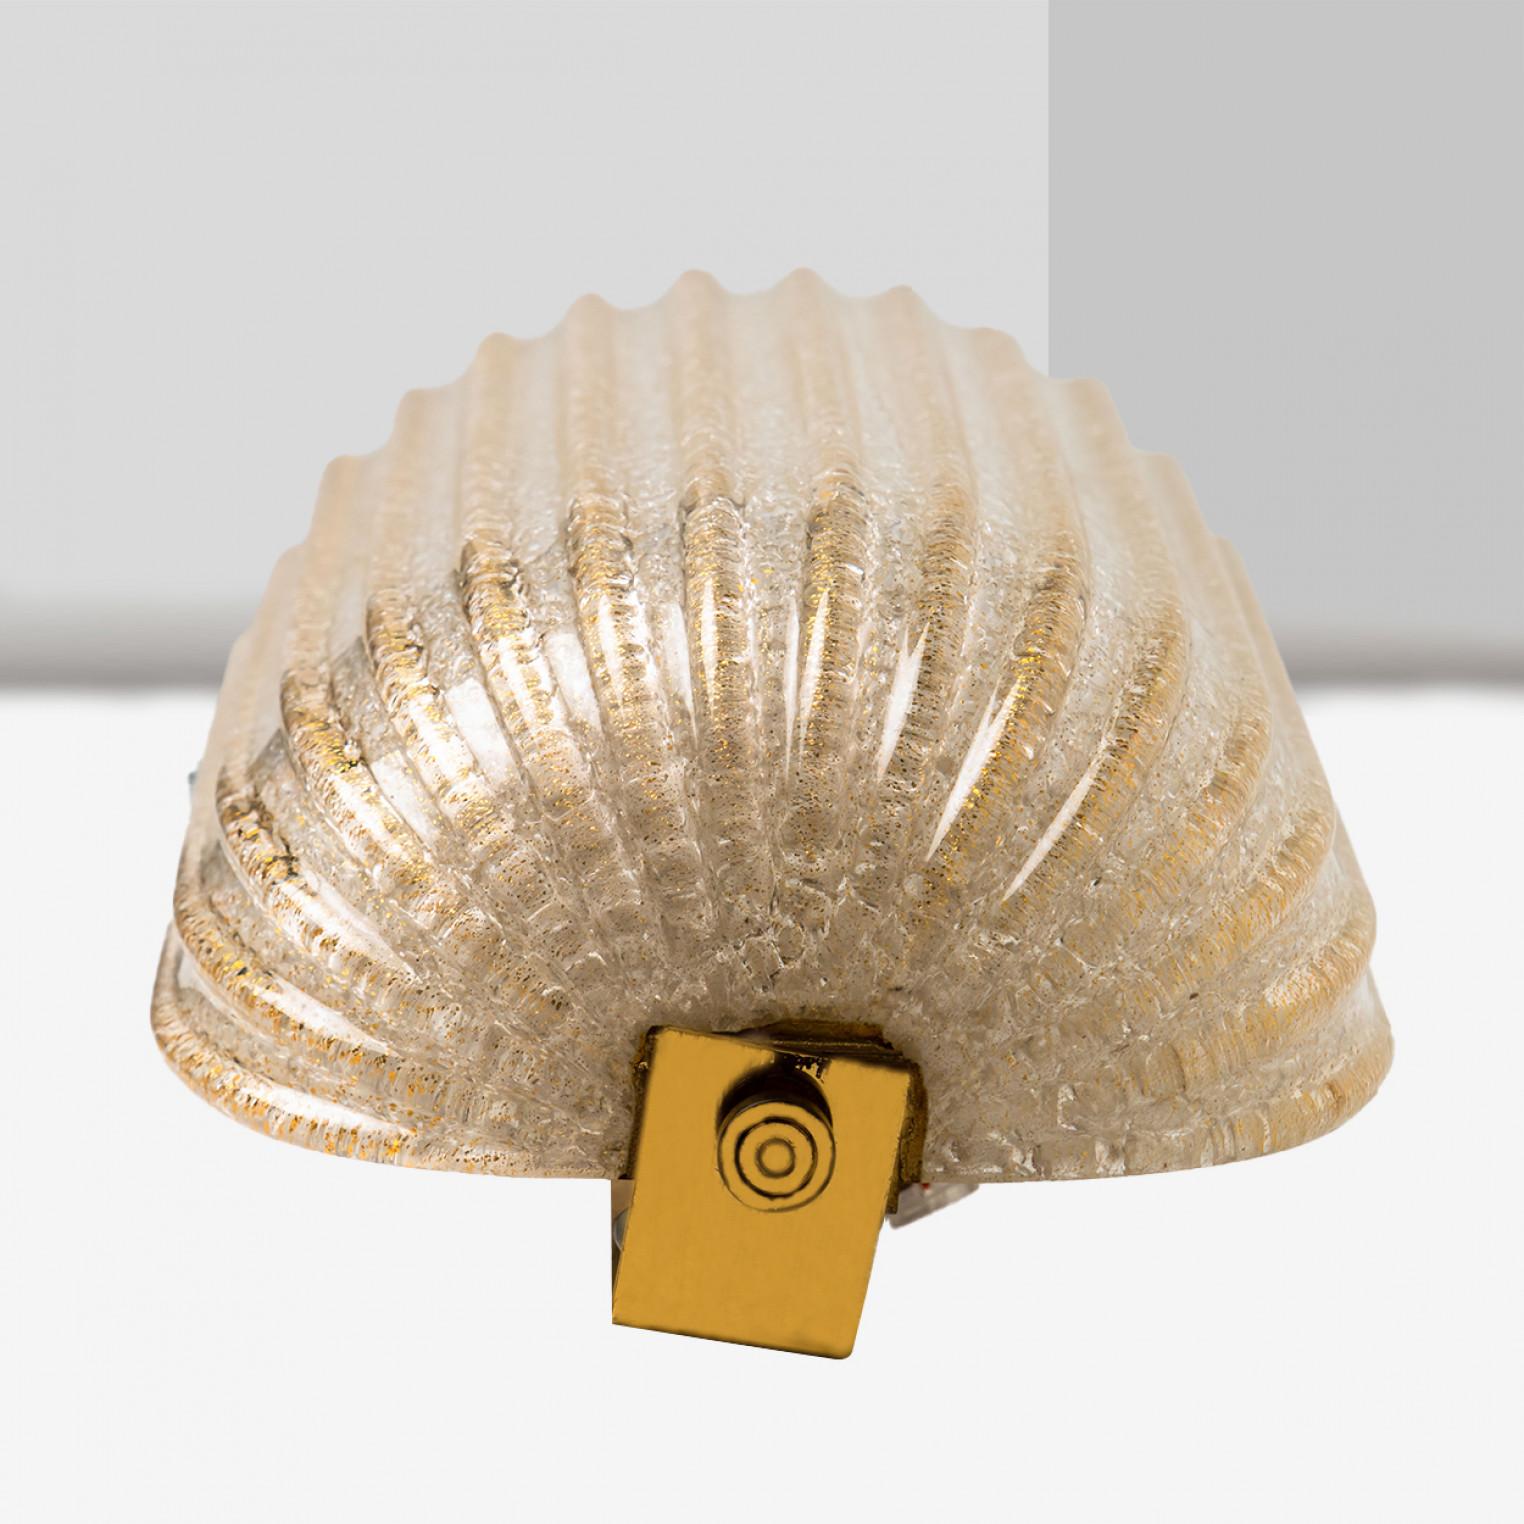 1 of 2 Fluted Murano Glass Wall Sconces Barovier, Italy, 1960s For Sale 2